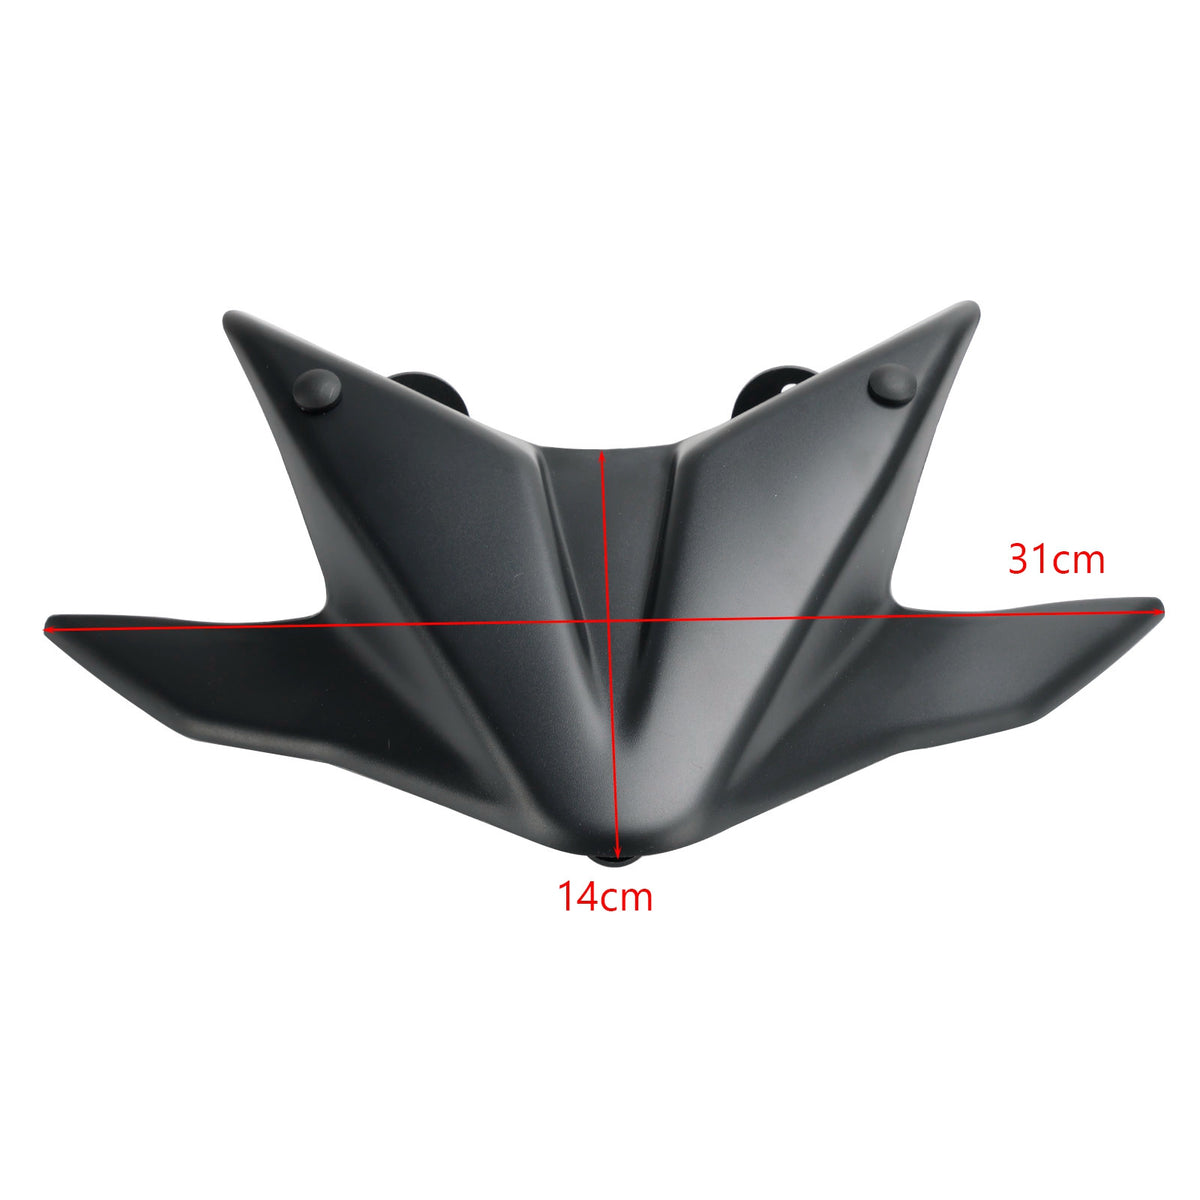 Front Wheel Beak Nose Cone Extension For YAMAHA Tracer 9 / GT 2021-2023